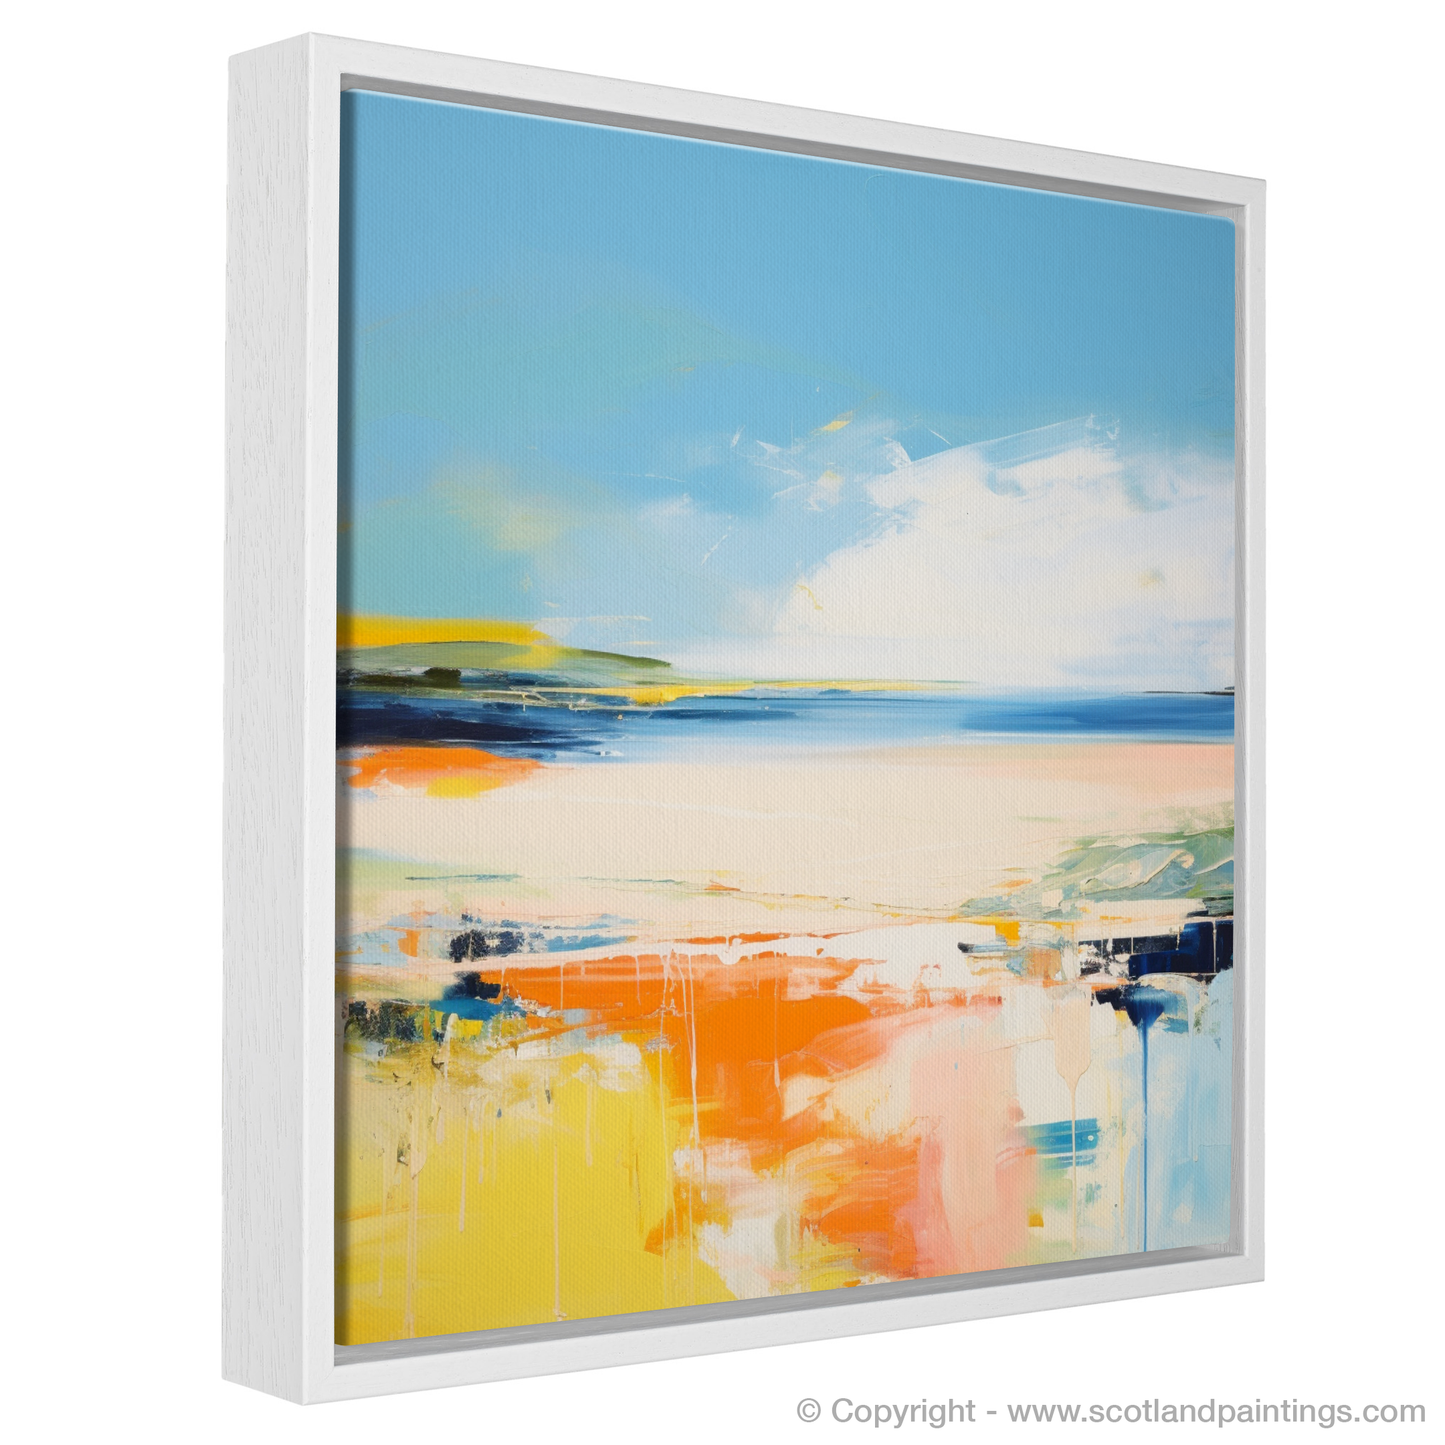 Painting and Art Print of Lunan Bay, Angus in summer entitled "Lunan Bay Summerscape: An Abstract Odyssey".